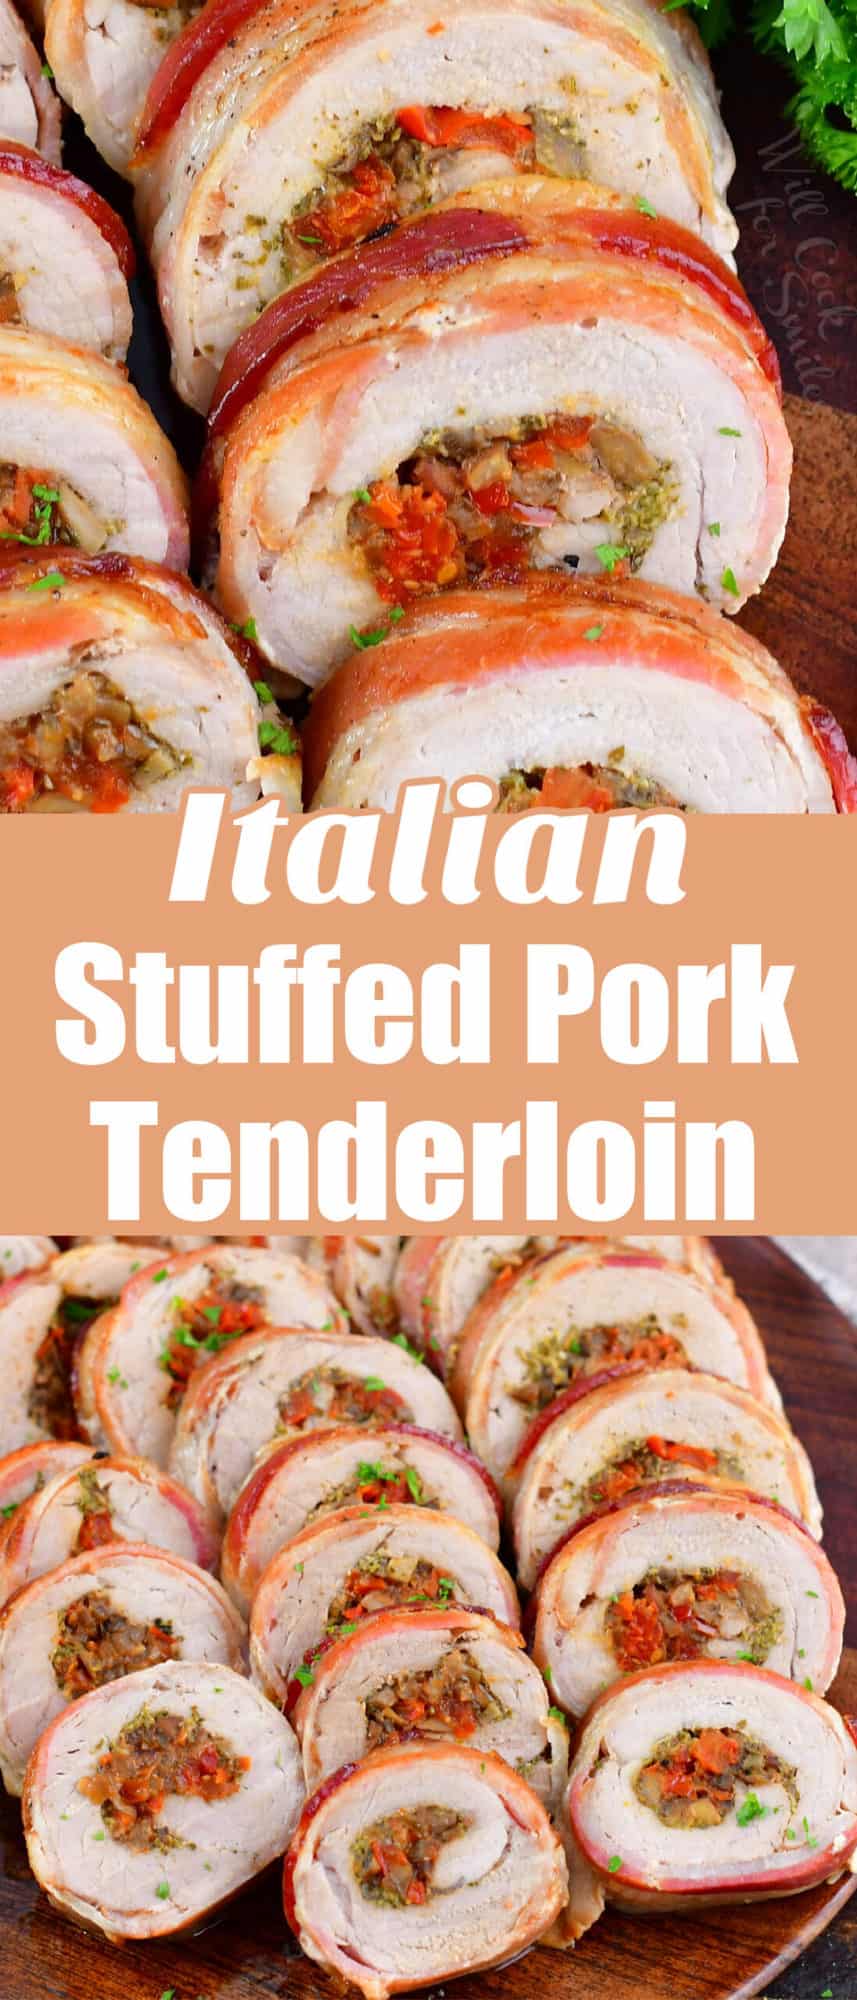 collage of two images of sliced stuffed pork tenderloin on a platter and title